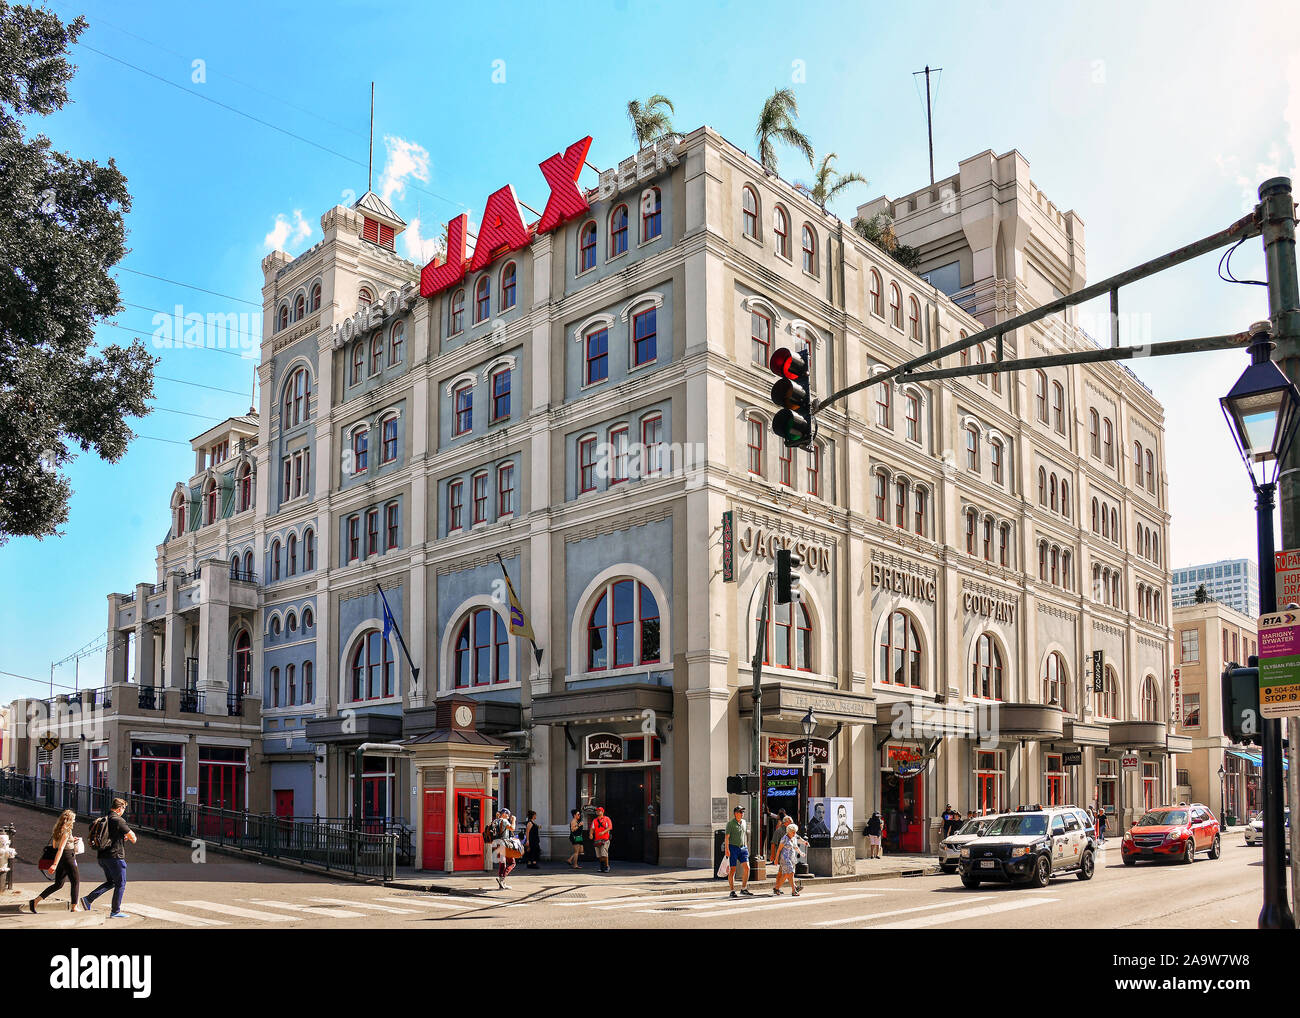 New Orleans, LA, USA - September 26, 2019: The historic building on Decatur St that once housed the Jackson Brewing Company but now contains restauran Stock Photo